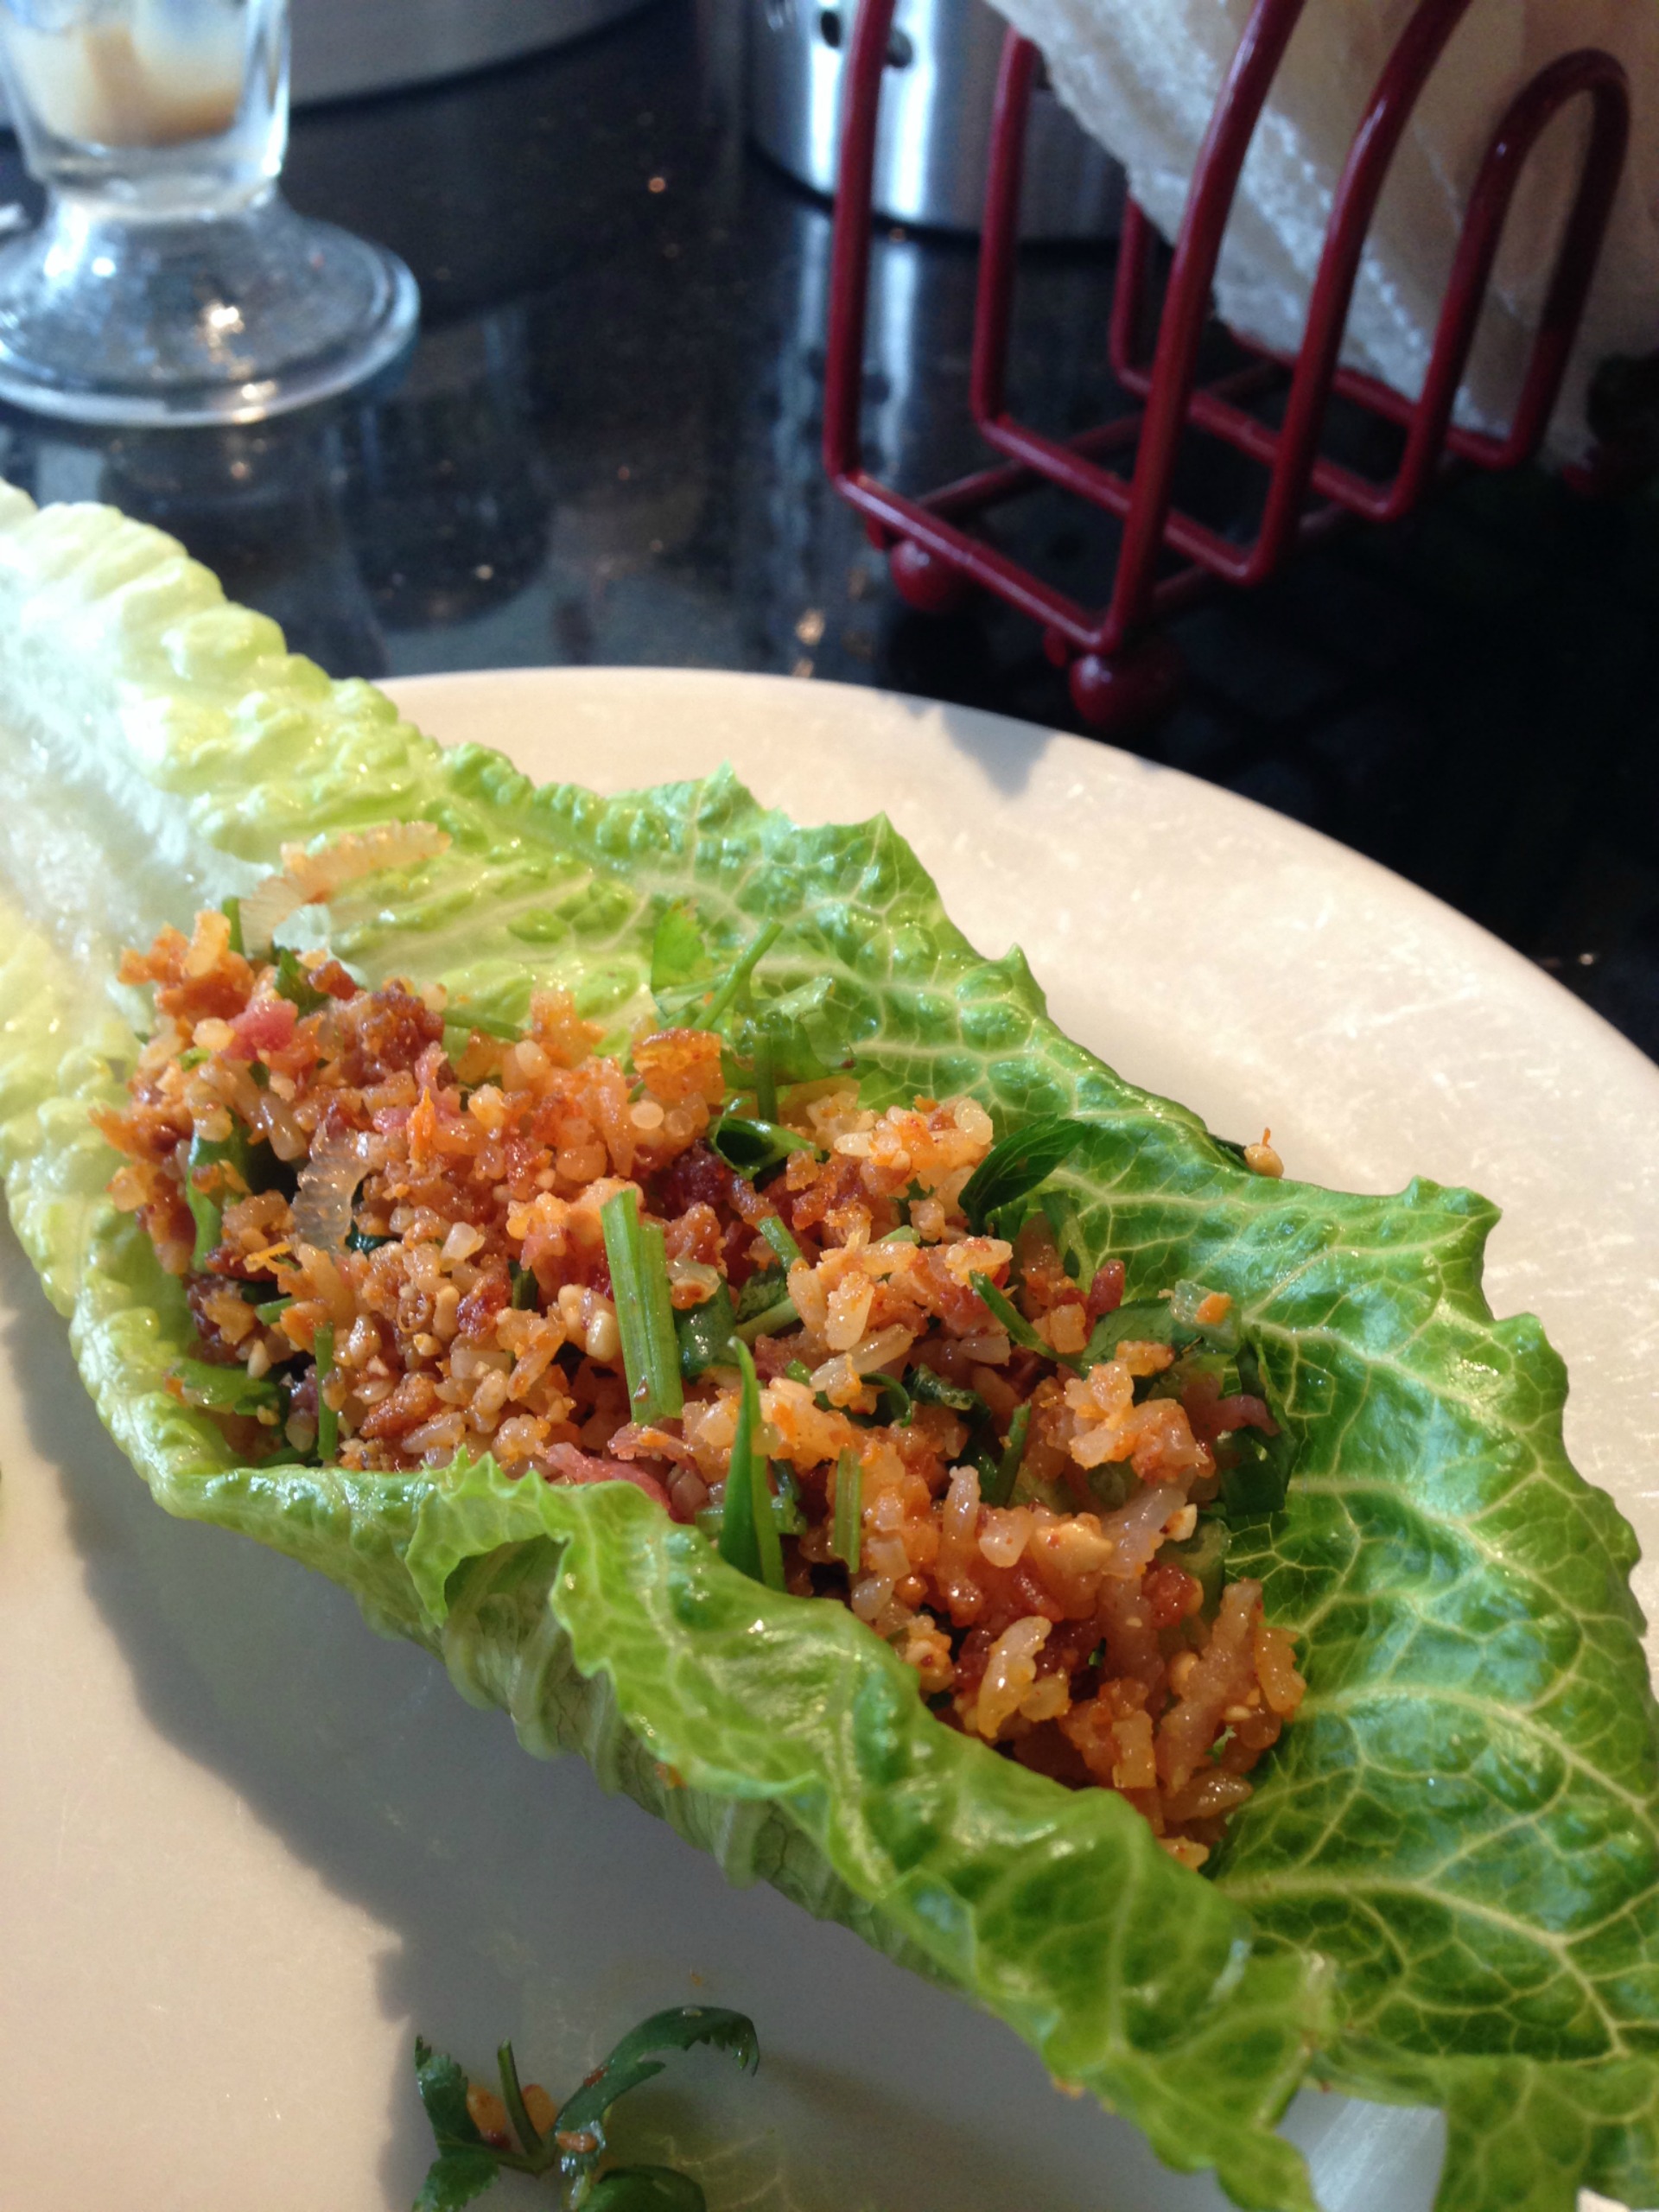 A lettuce wrap with the fried rice ball salad.